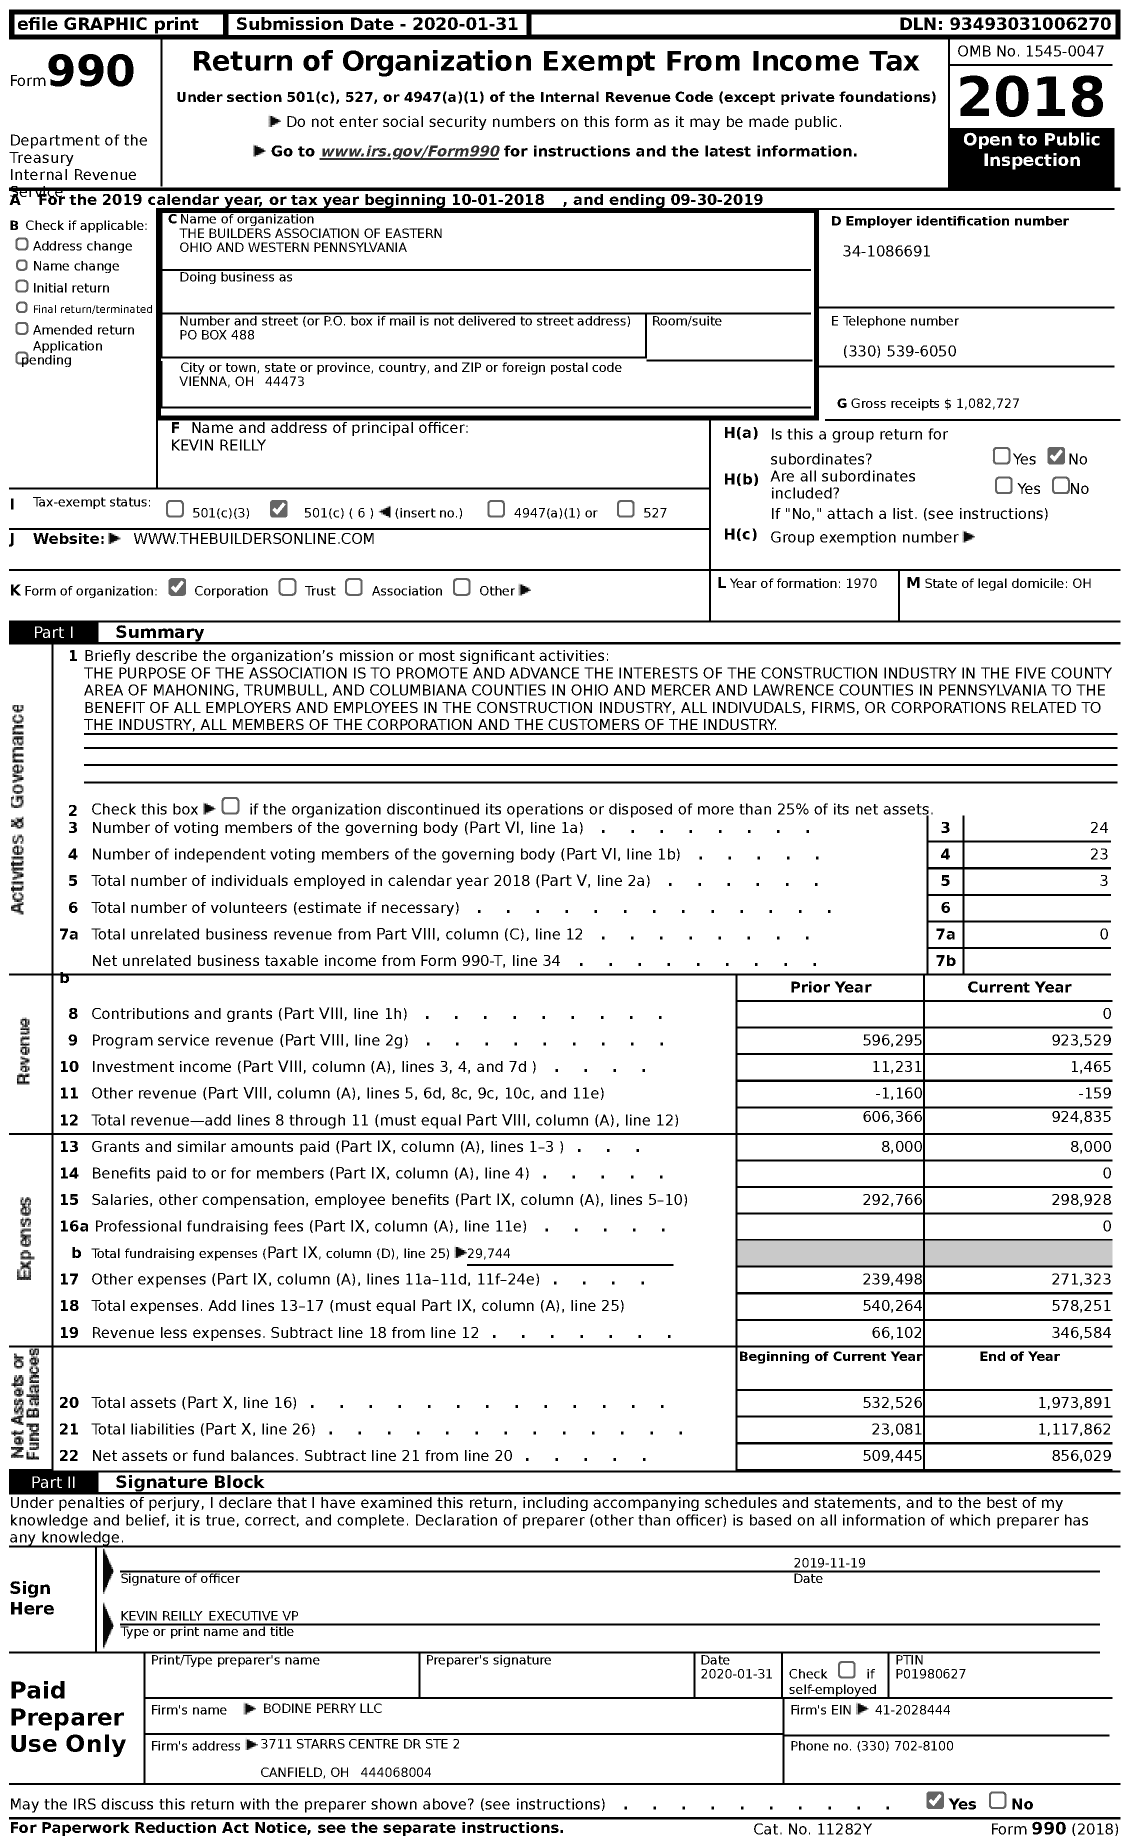 Image of first page of 2018 Form 990 for The Builders Association of Eastern Ohio and Western Pennsylvania